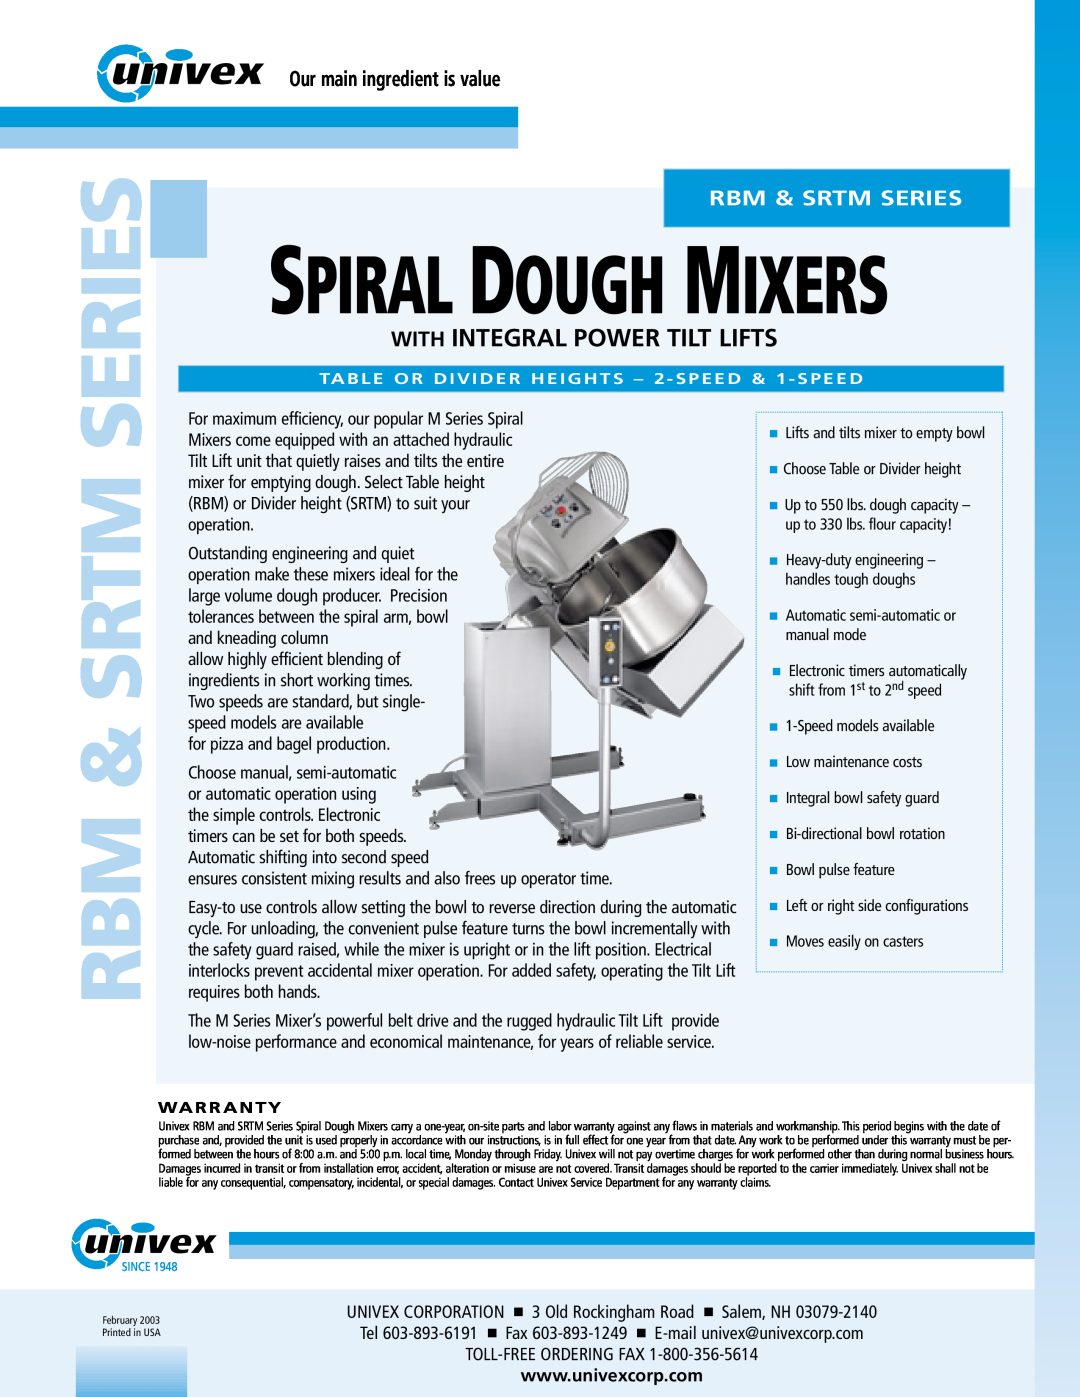 Univex RBM warranty Series, Rbm & Srtm, Spiral Dough Mixers, With Integral Power Tilt Lifts, Our main ingredient is value 